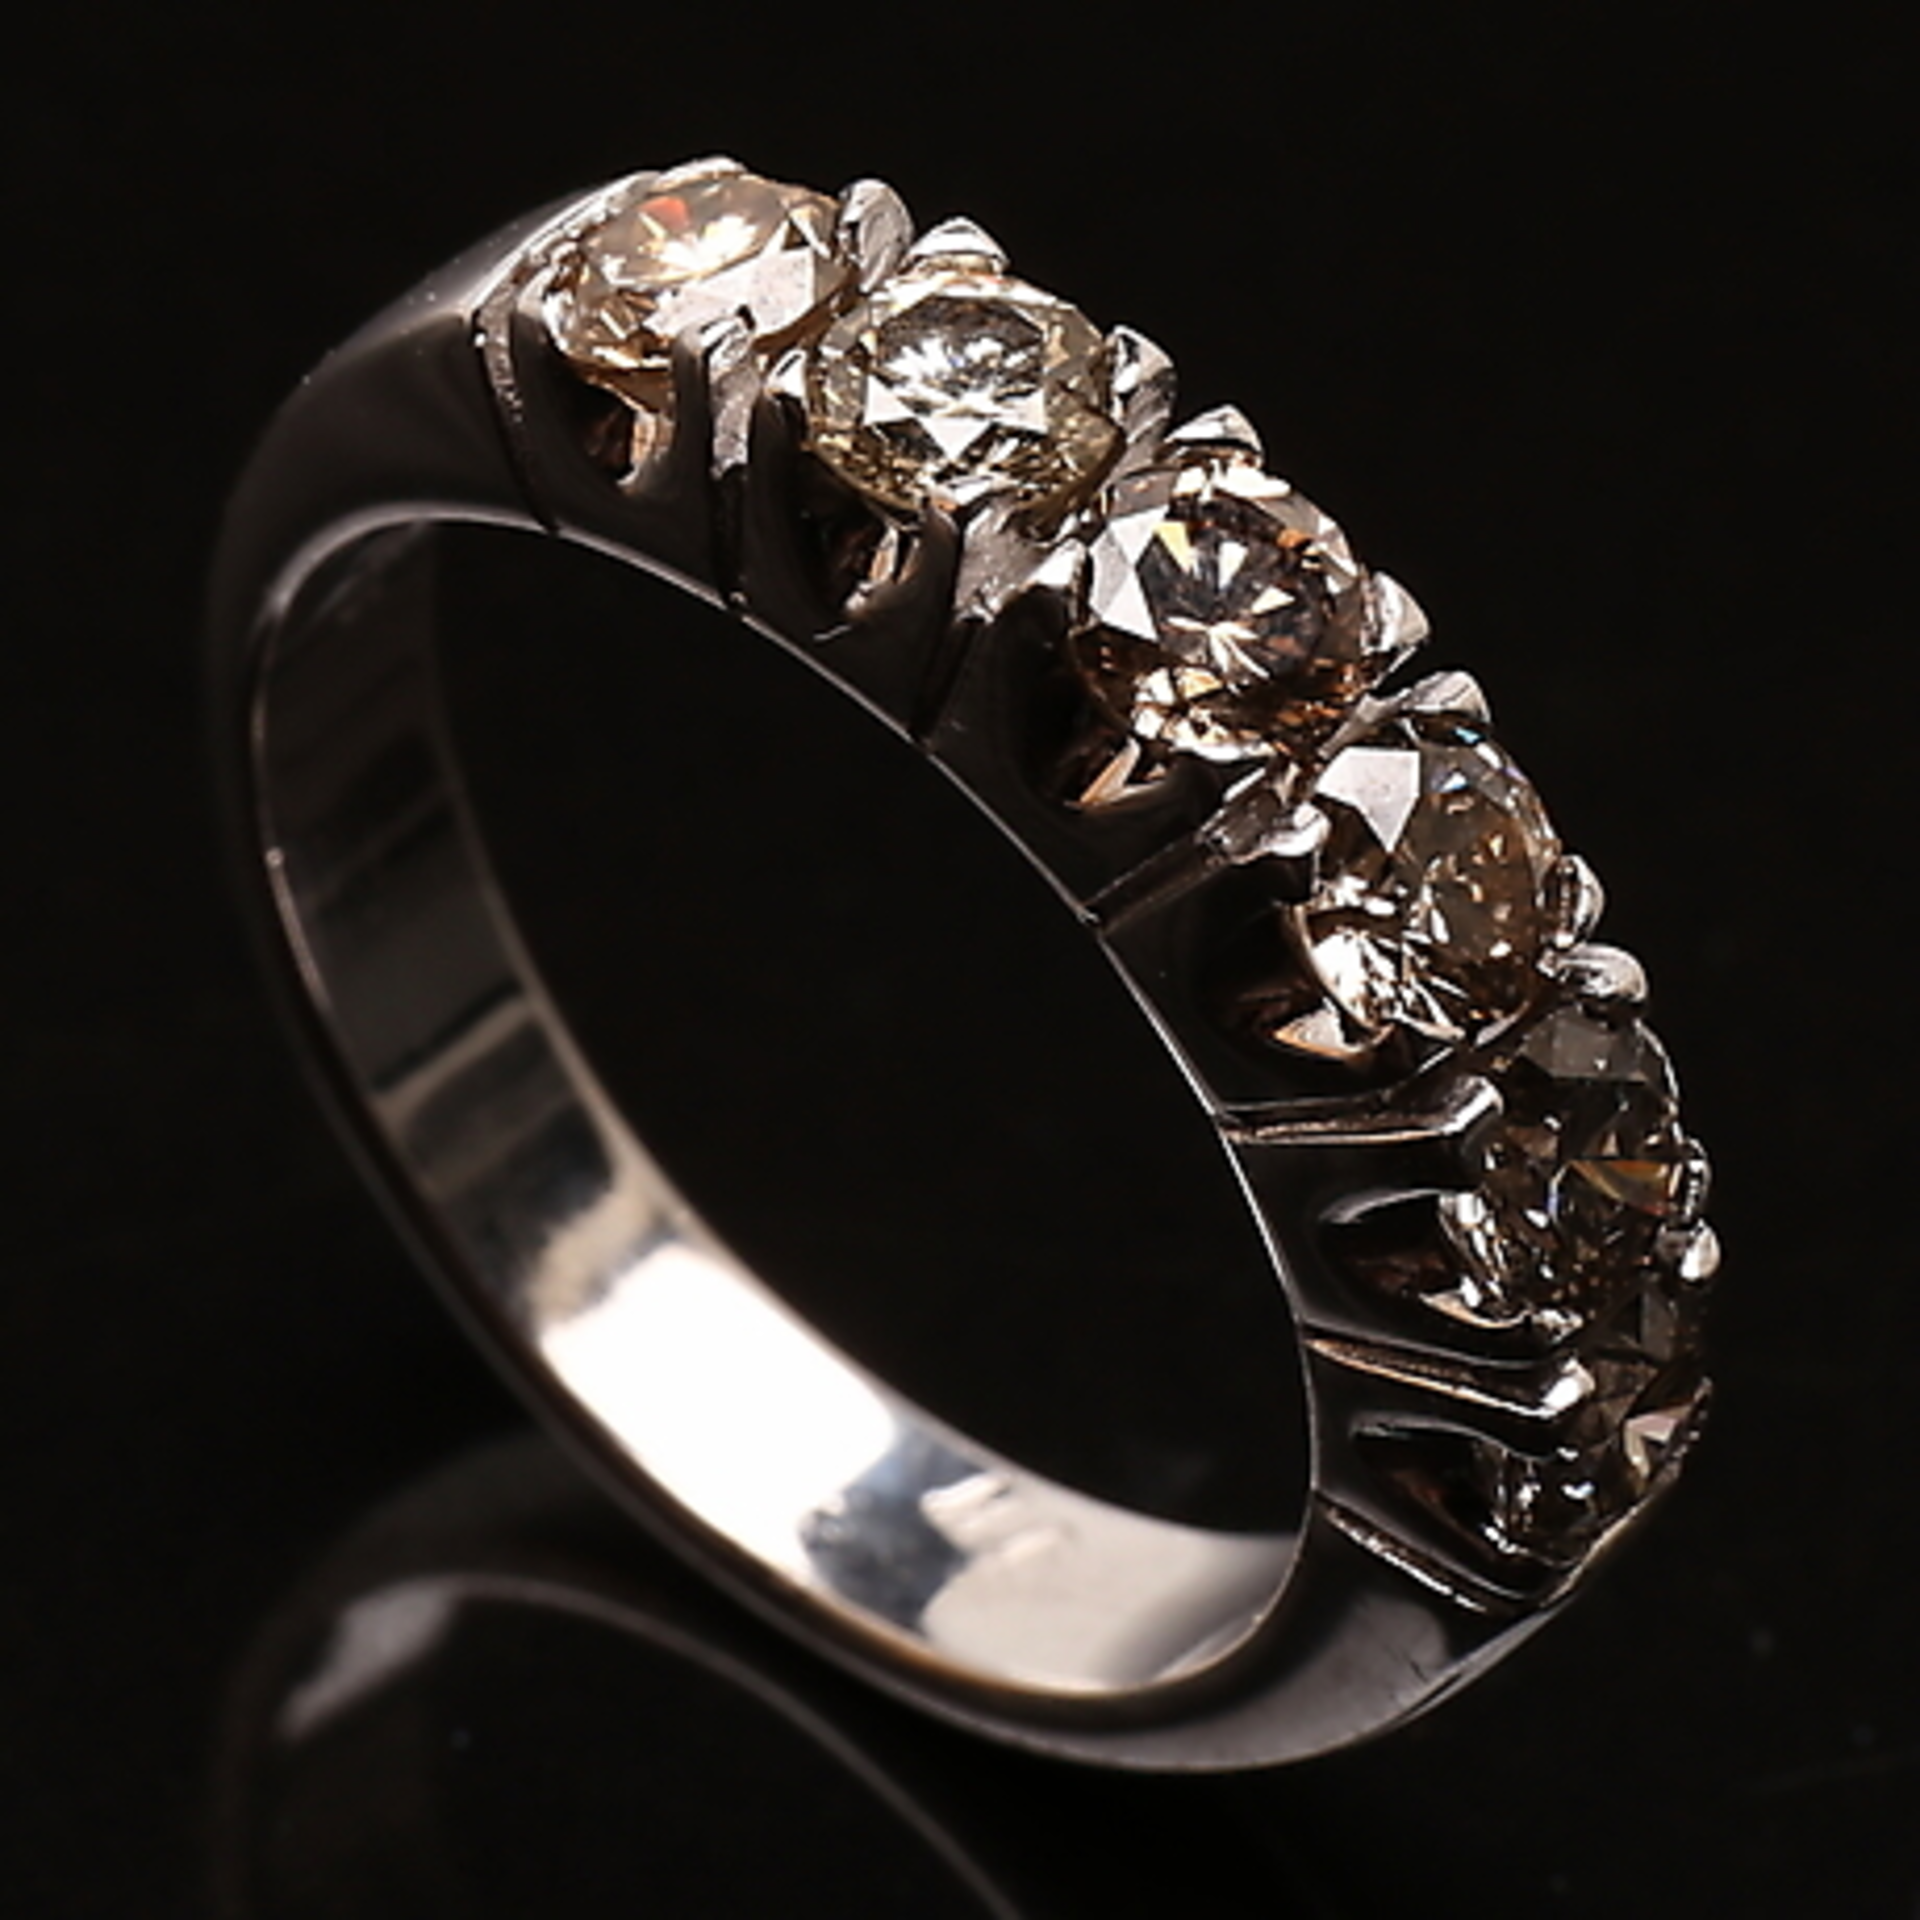 Ring in 14K white gold with brilliant cut diamonds